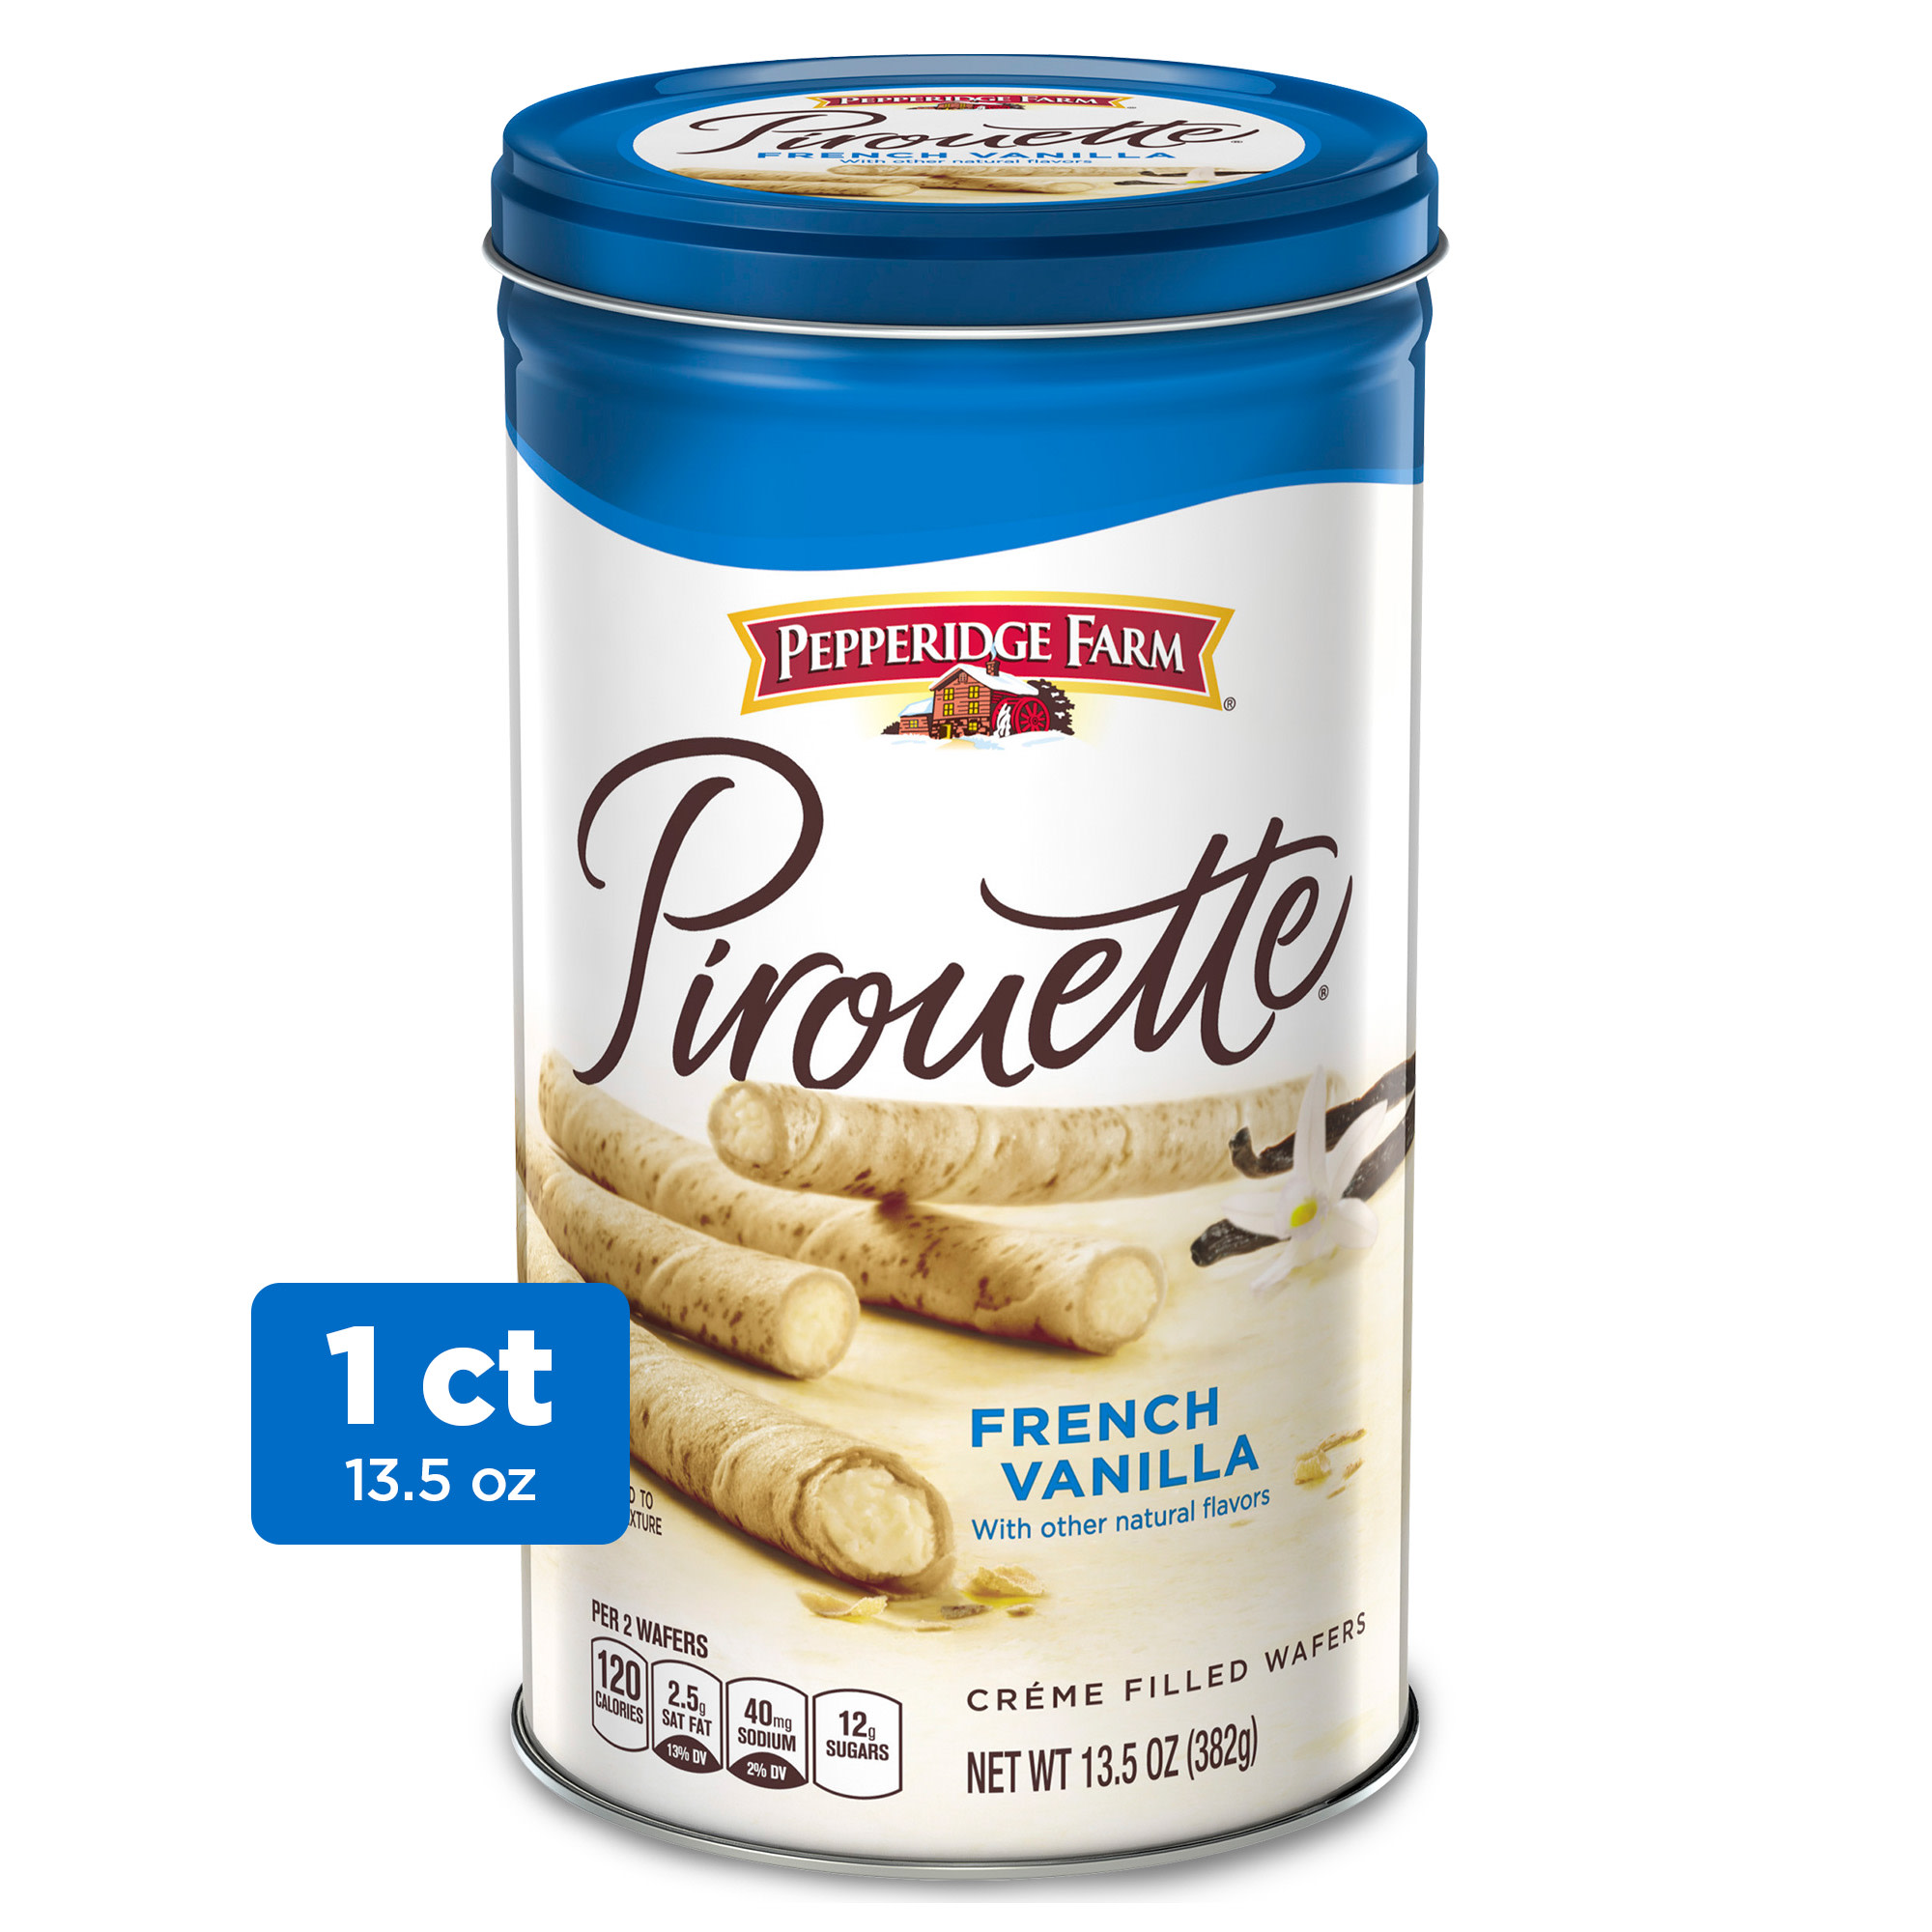 Pepperidge Farm Pirouette Cookies, French Vanilla Crème Filled Wafers, 13.5 oz Tin - image 1 of 9